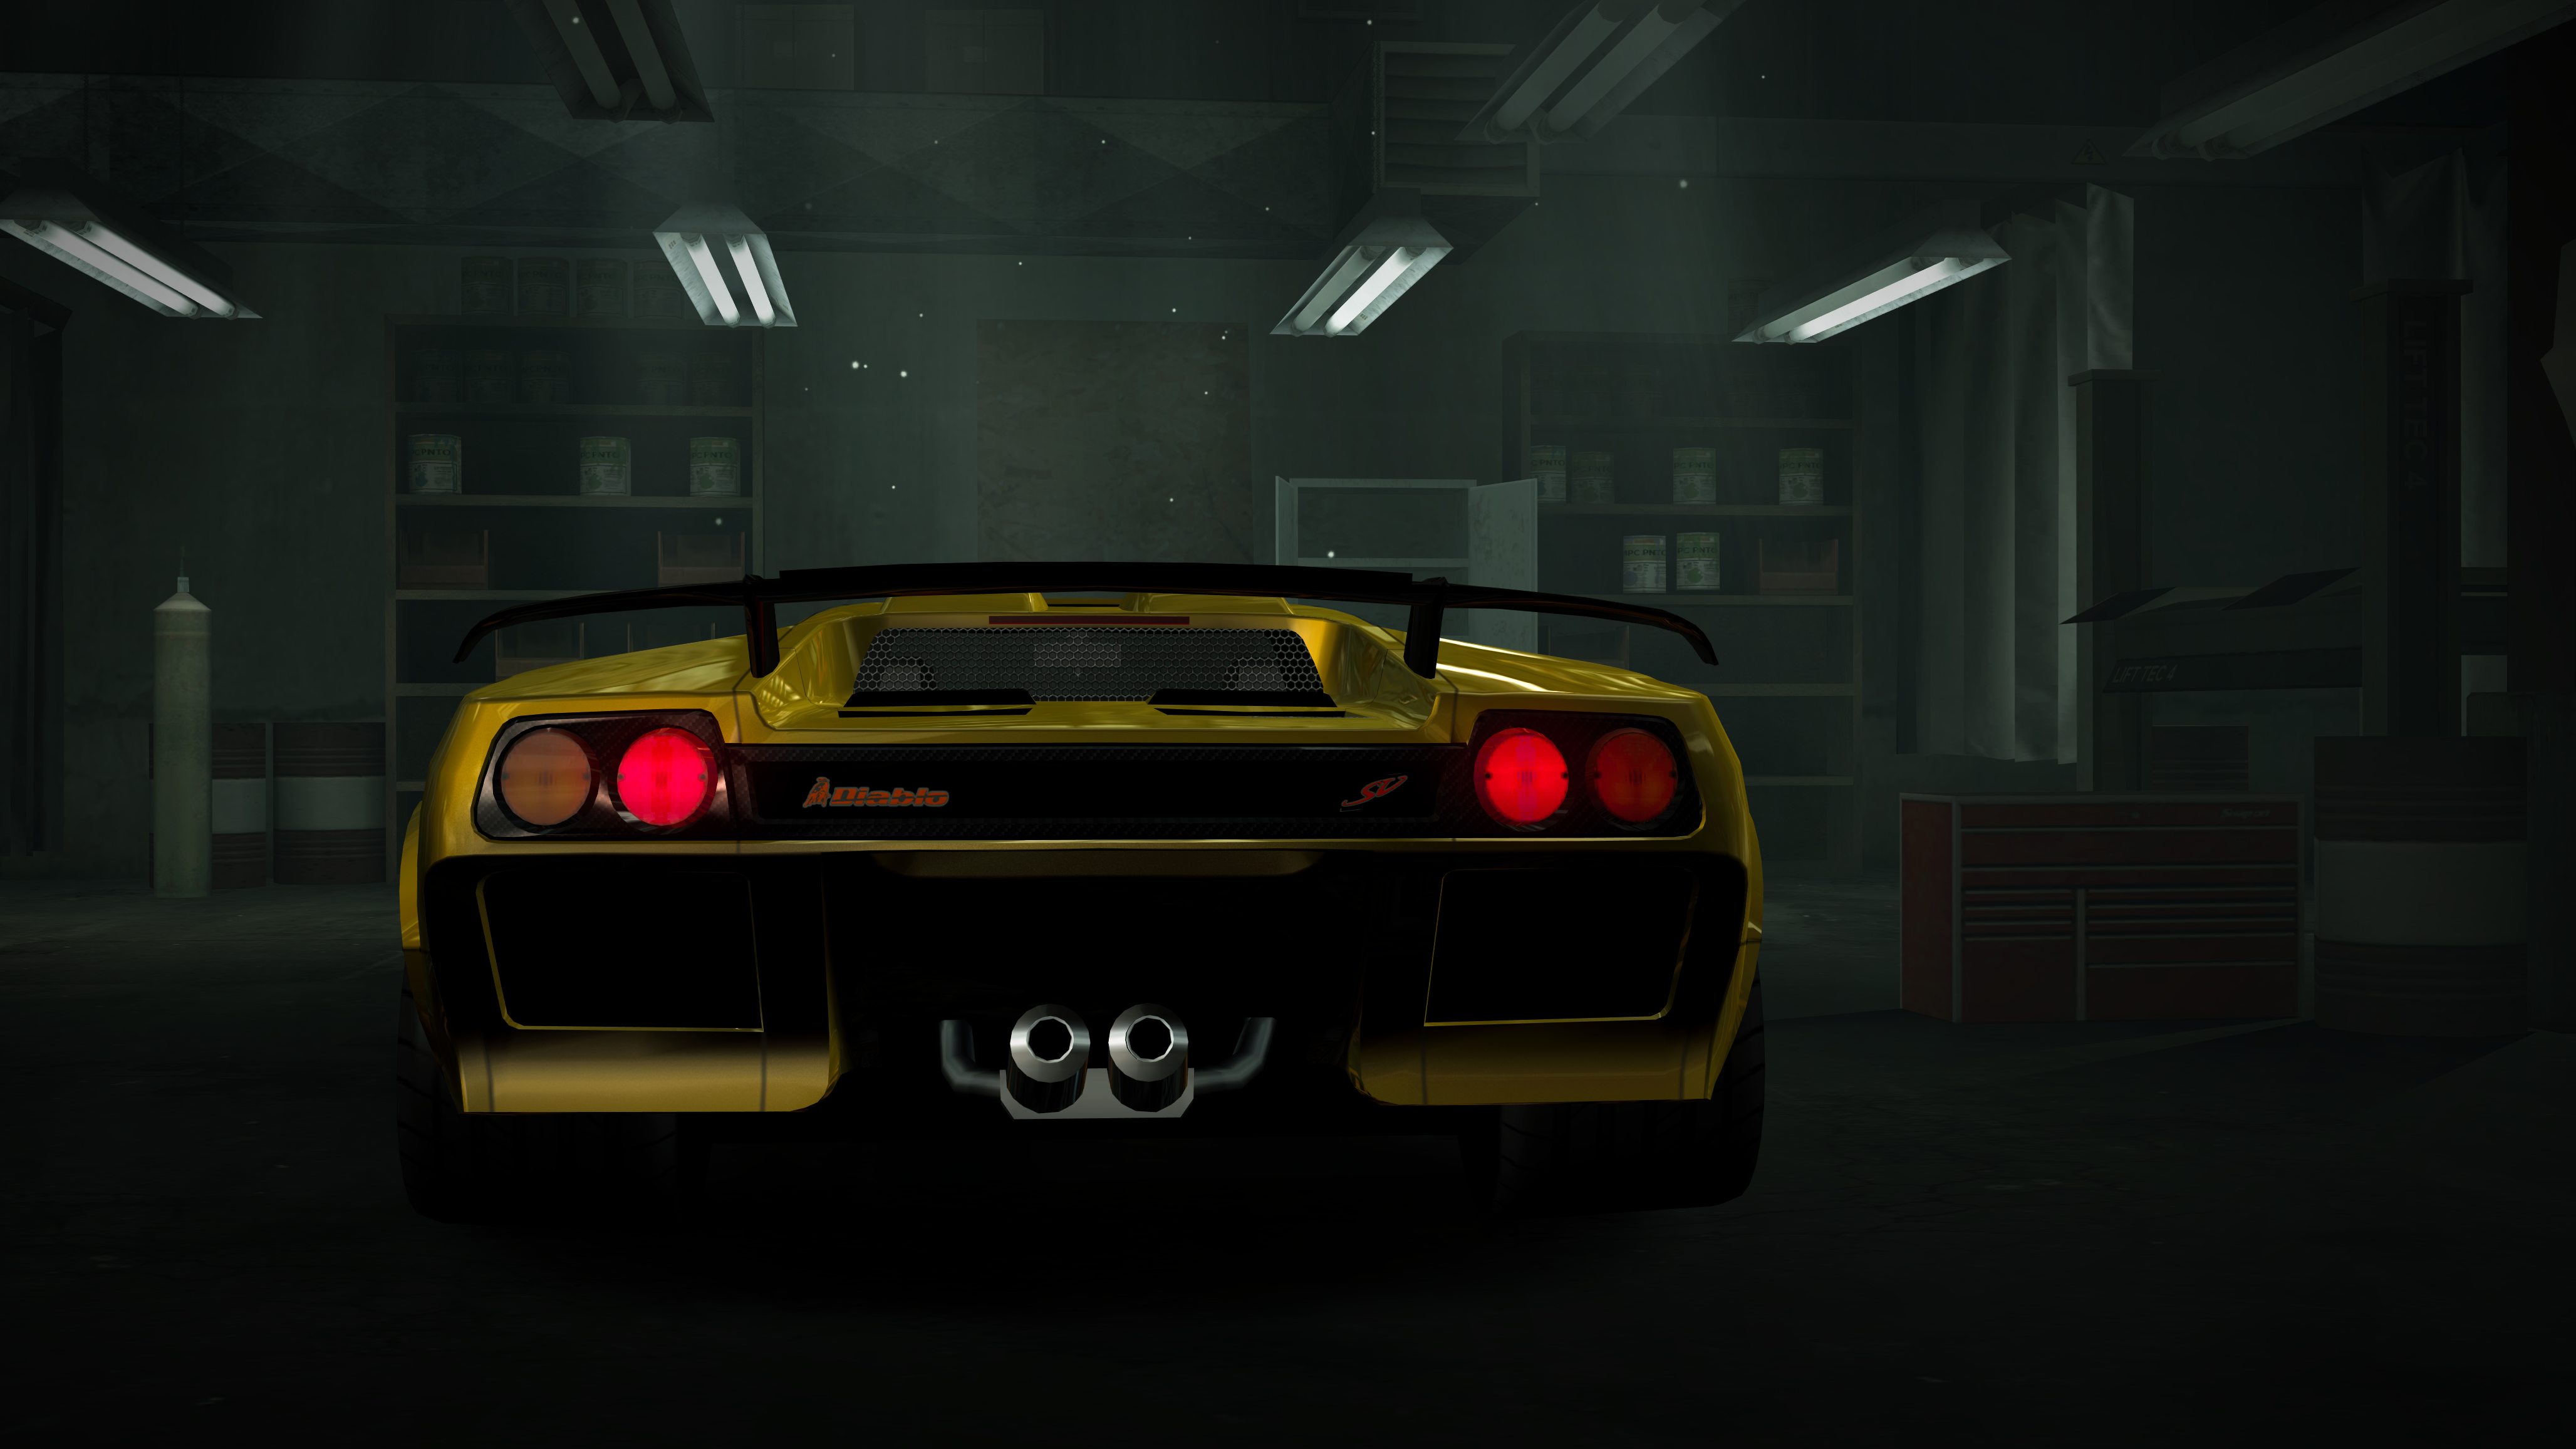 General 4112x2313 Lamborghini Diablo garage Need for Speed Need for Speed: World car vehicle video games rear view taillights CGI